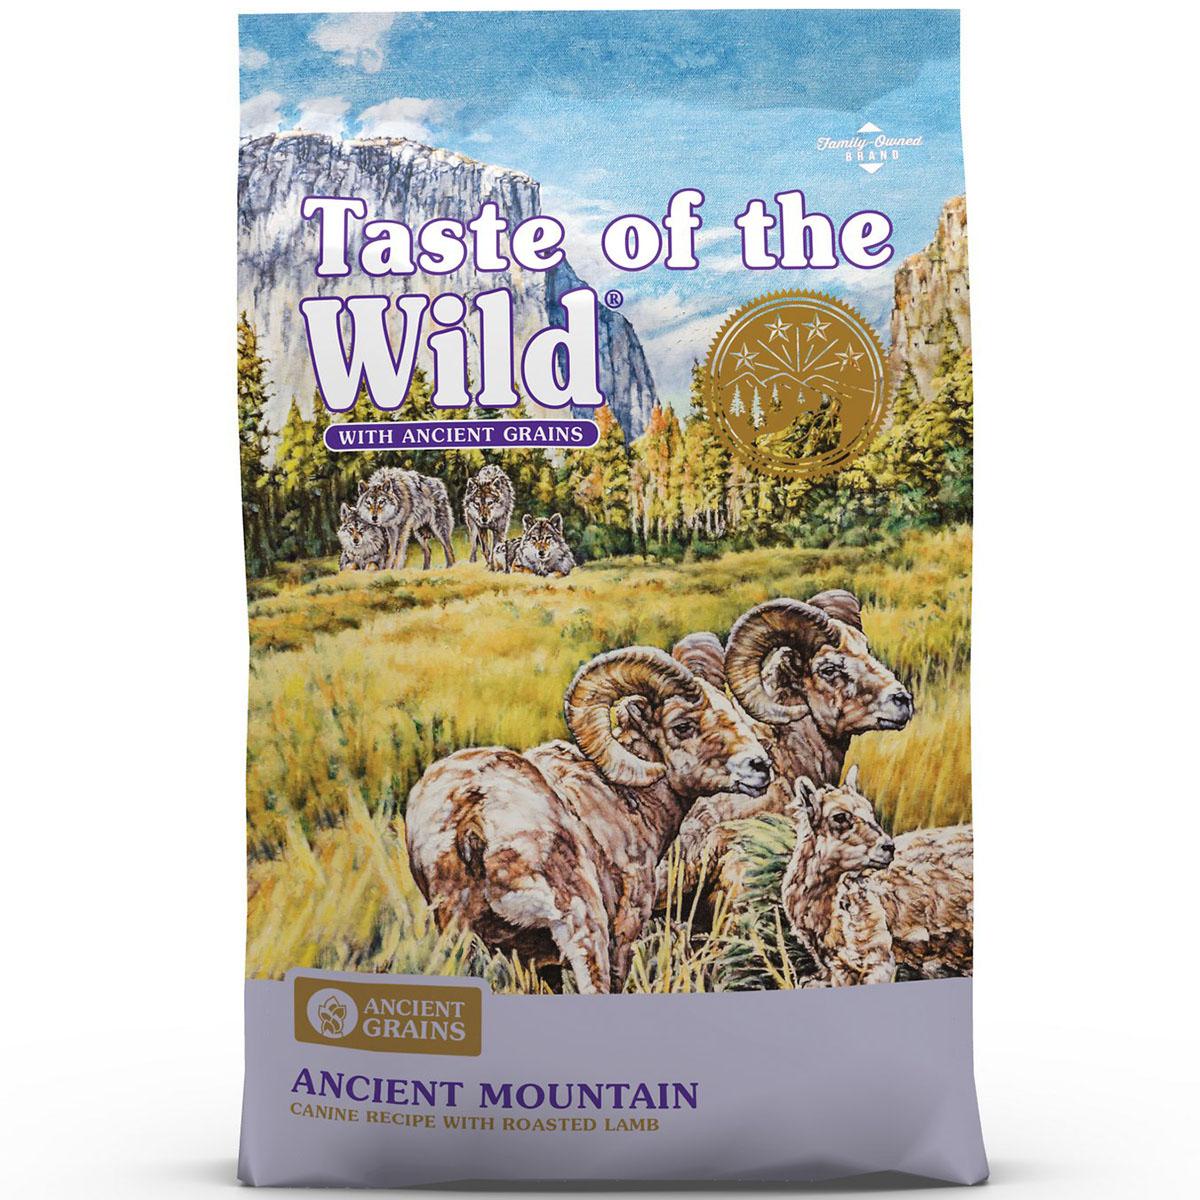 Taste of the Wild Ancient Mountain with Ancient Grains Dry Dog Food 